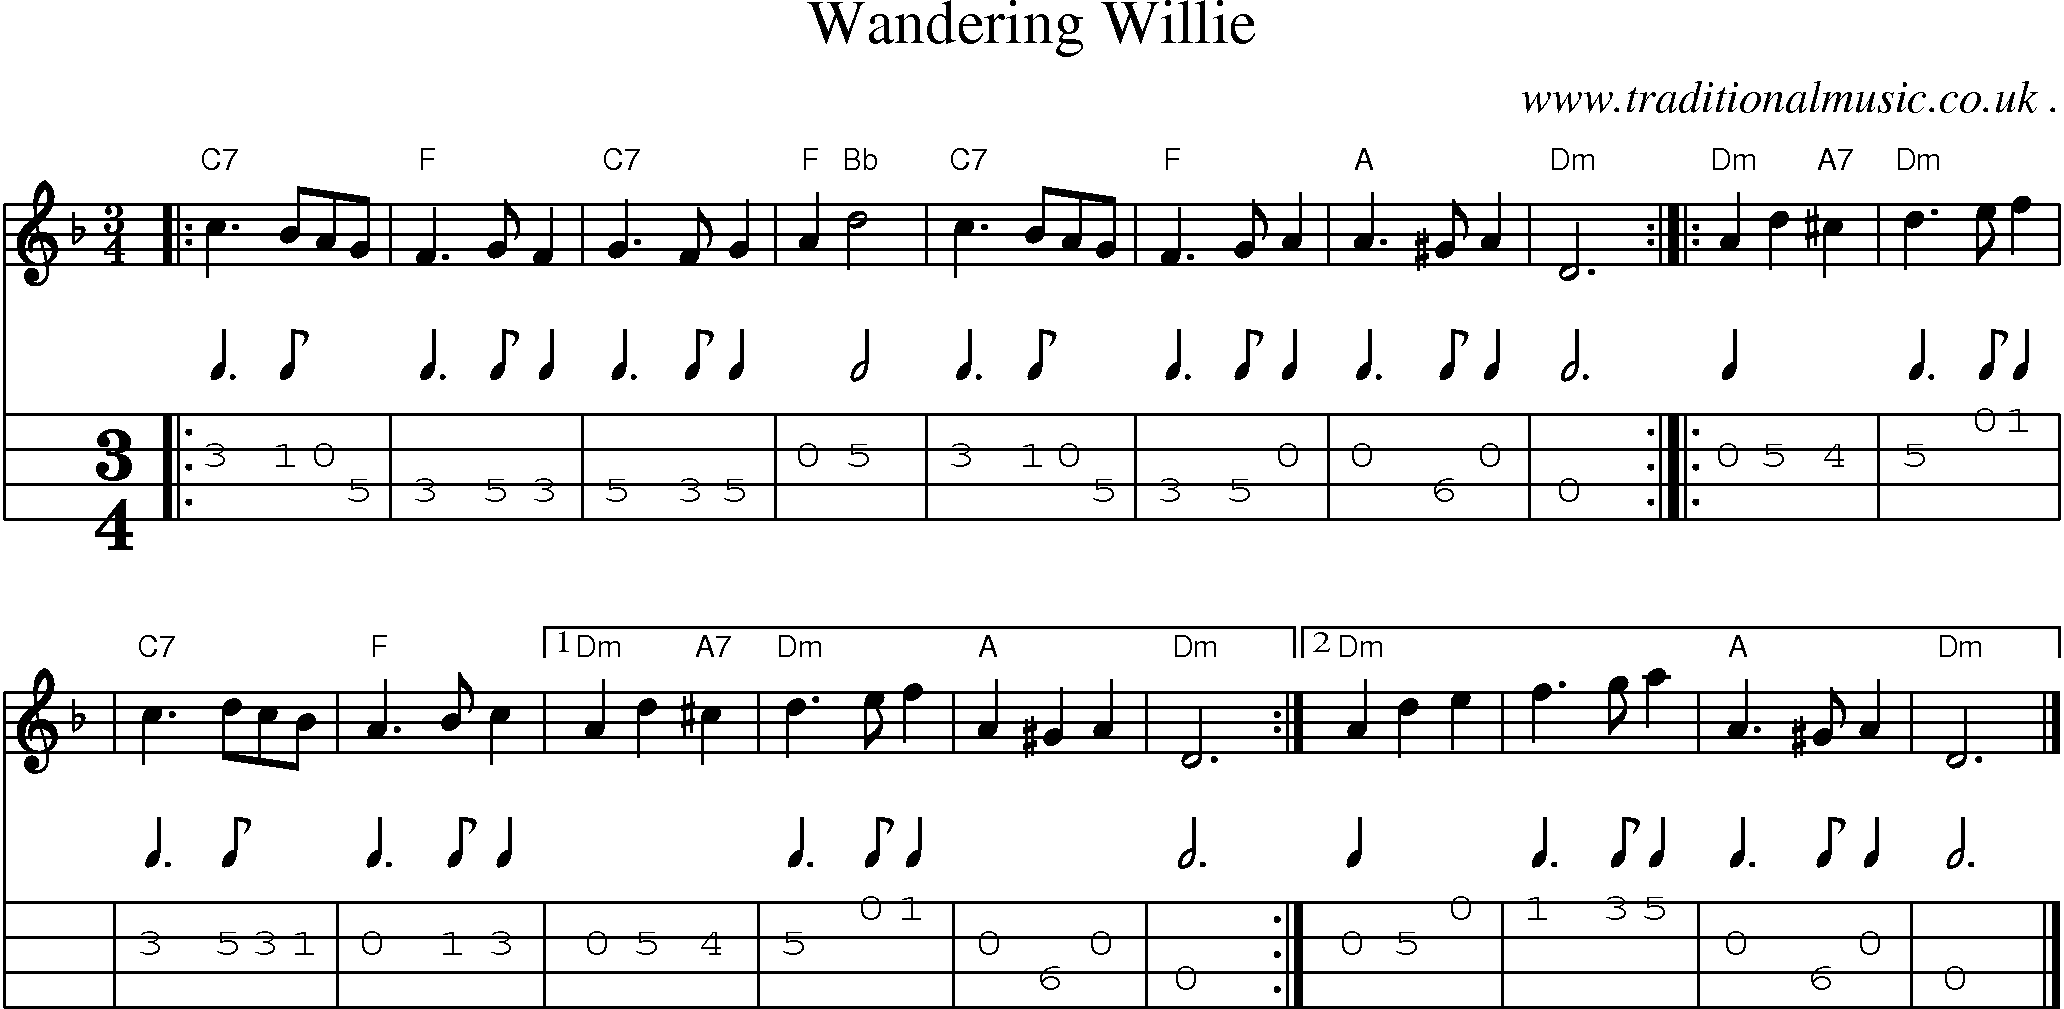 Sheet-music  score, Chords and Mandolin Tabs for Wandering Willie